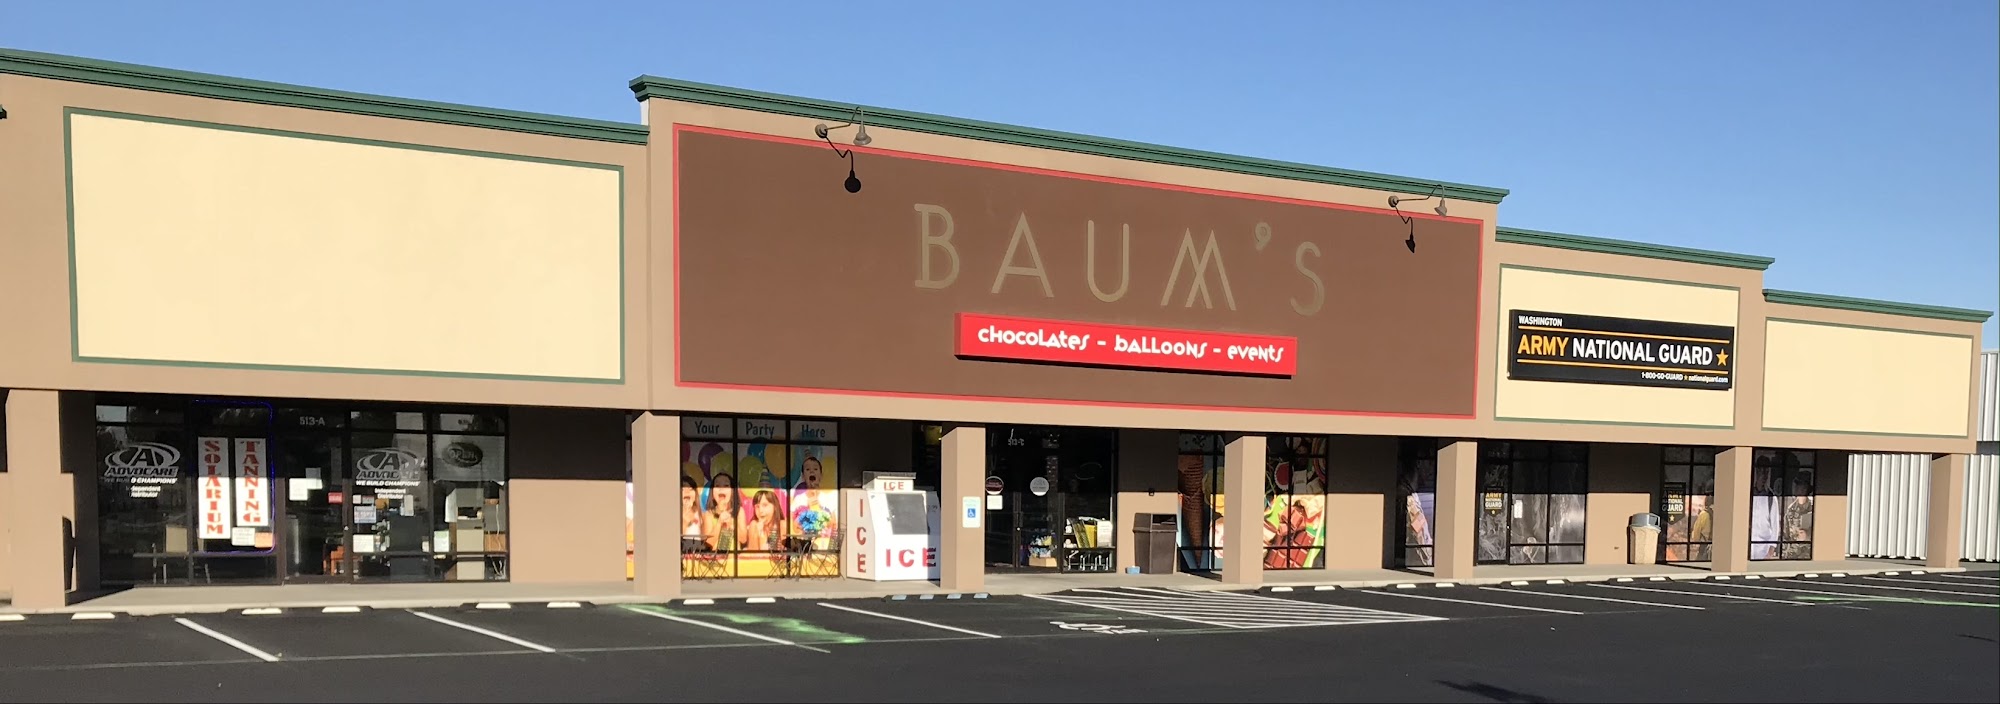 Baum's Chocolate, Balloons, and Events